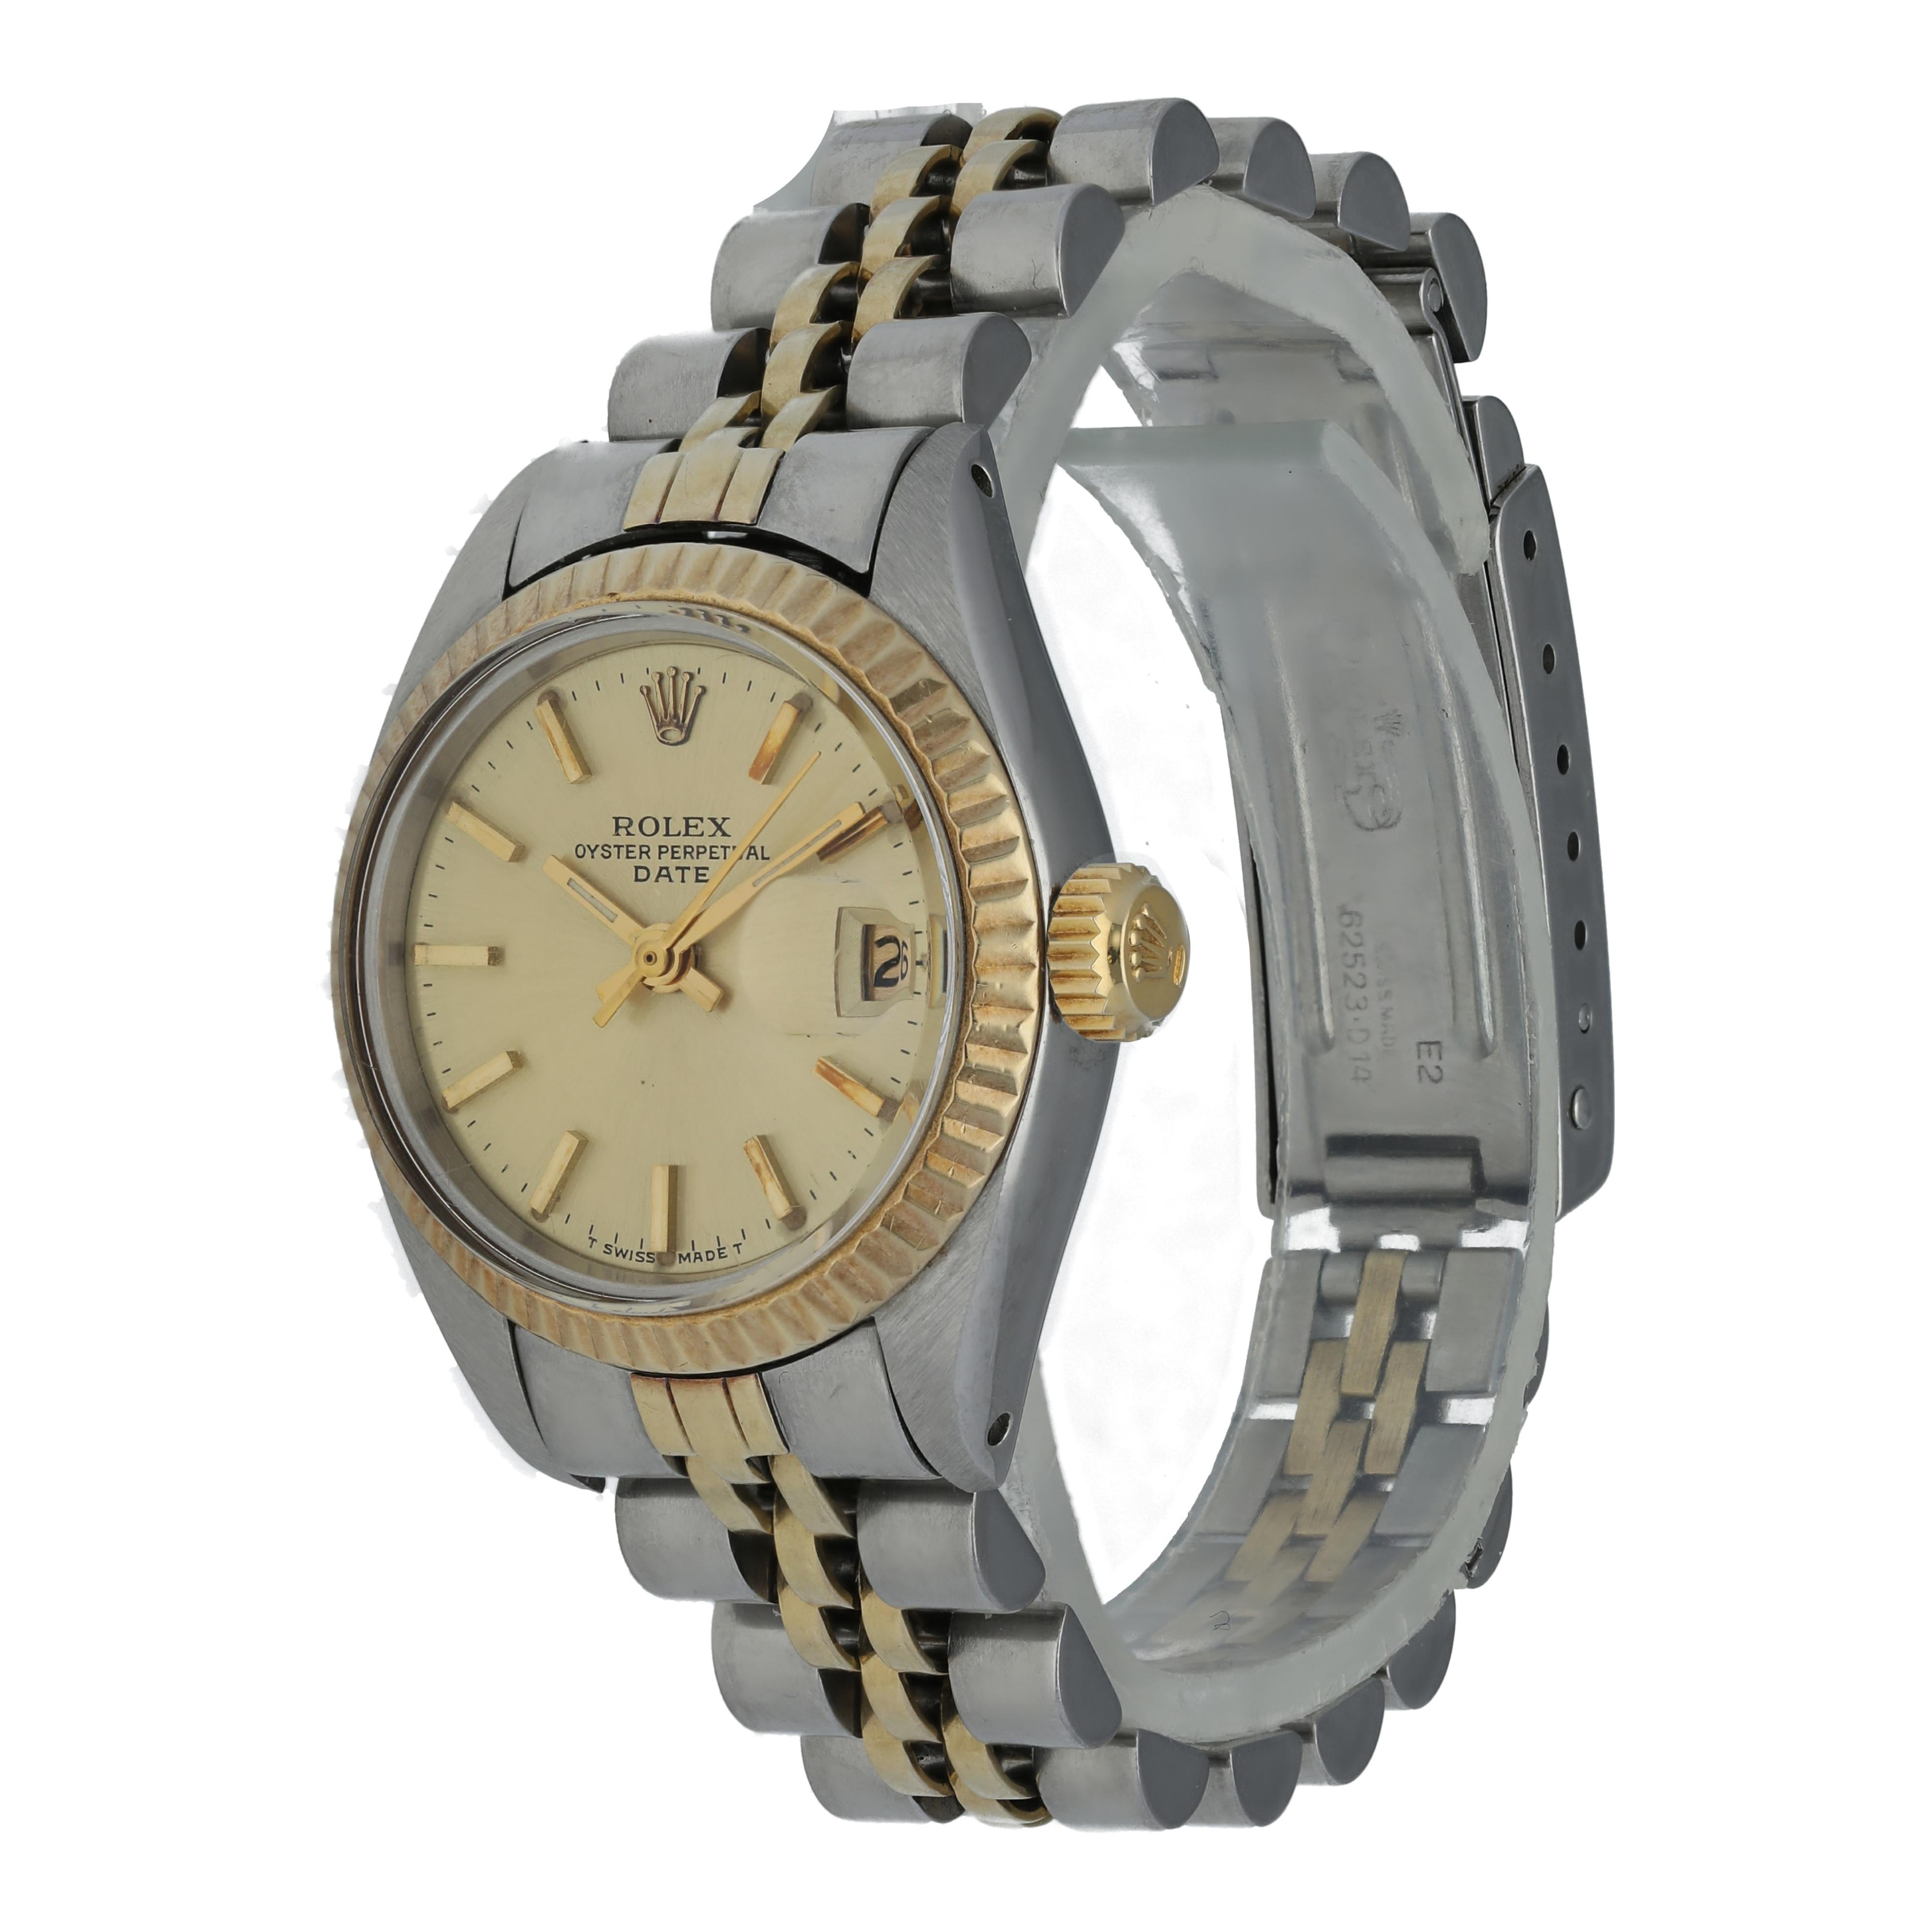 Rolex Oyster Perpetual Date 6917 Ladies Watch
26mm Stainless Steel case. 
Yellow Gold Stationary bezel. 
Off-White dial with gold hands and index hour markers. 
Minute markers on the outer dial. 
Date display at the 3 o'clock position. 
Stainless